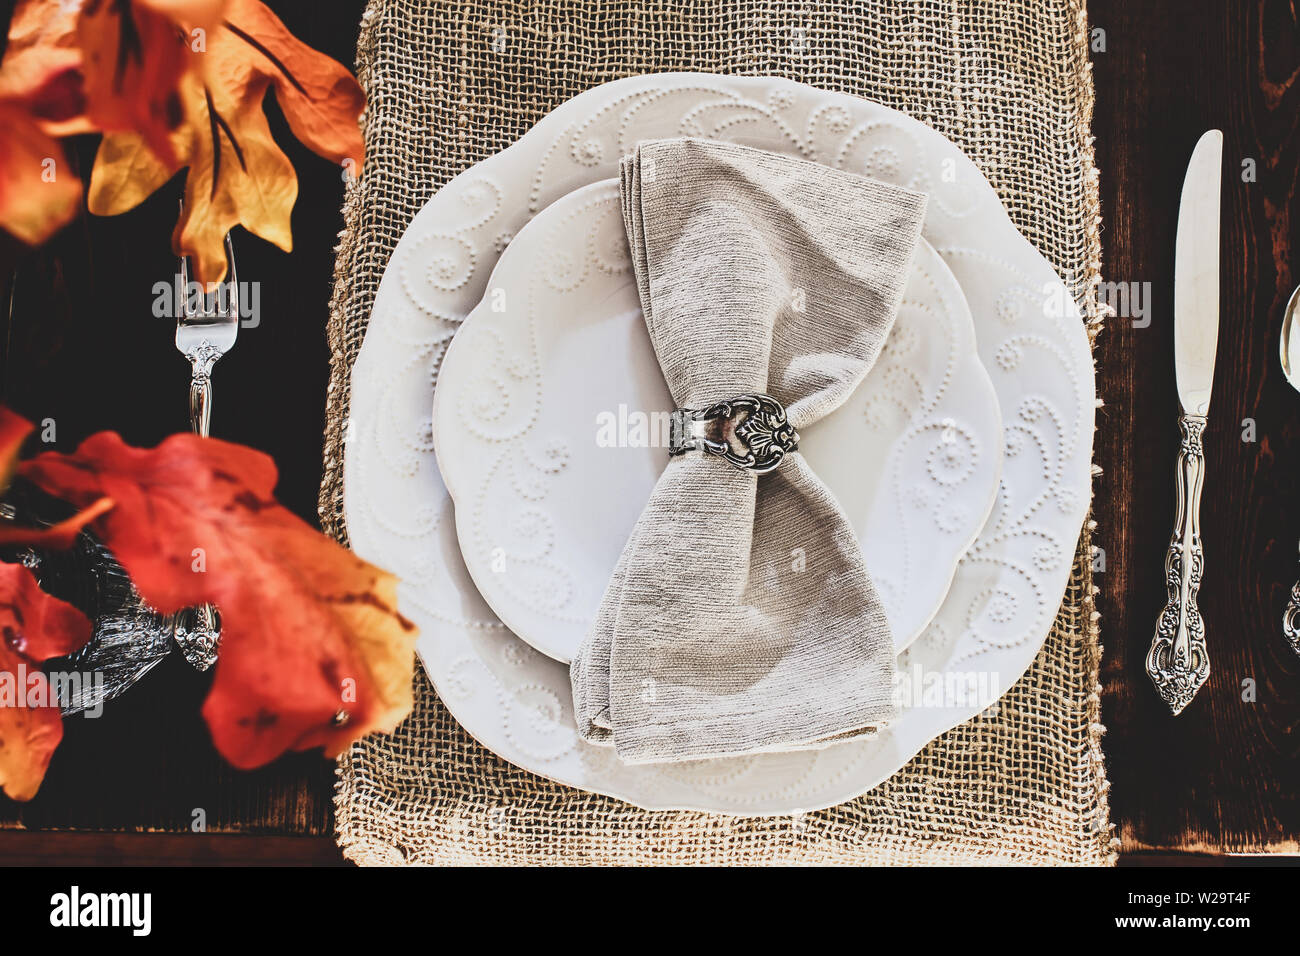 Thanksgiving Day or autumn place setting with napkins and cutlery on burlap table runner over a rustic farmhouse table background. Colorful fall leave Stock Photo